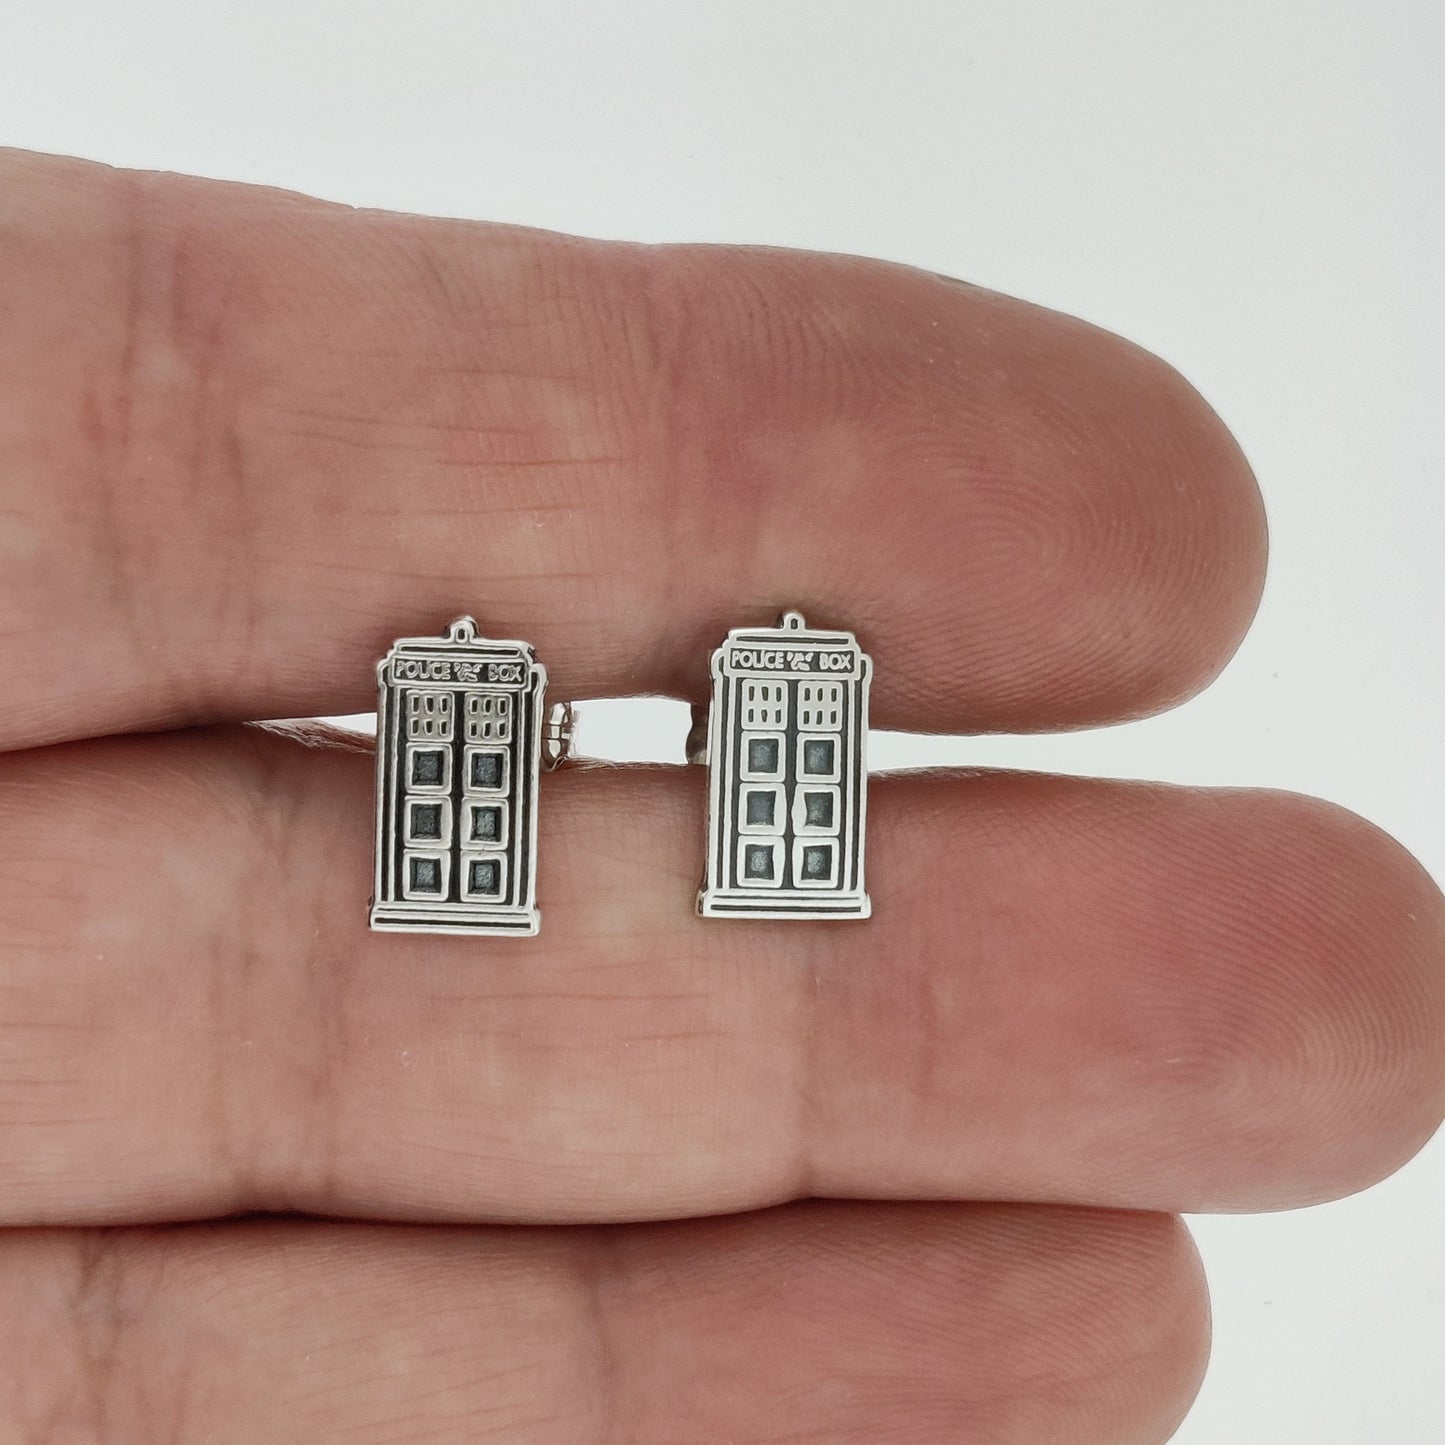 Gold Dr Who Tardis Stud Earrings made to order, Dr Who Earrings, Phone Box Stud Earrings, Sci-Fi Stud Earrings, Gold Police Box Earrings, Gold Stud Earrings, Gold Phone Box Studs, Dr Who Phone Box Earrings, Dr Who Jewelry, Gold Tardis Earrings